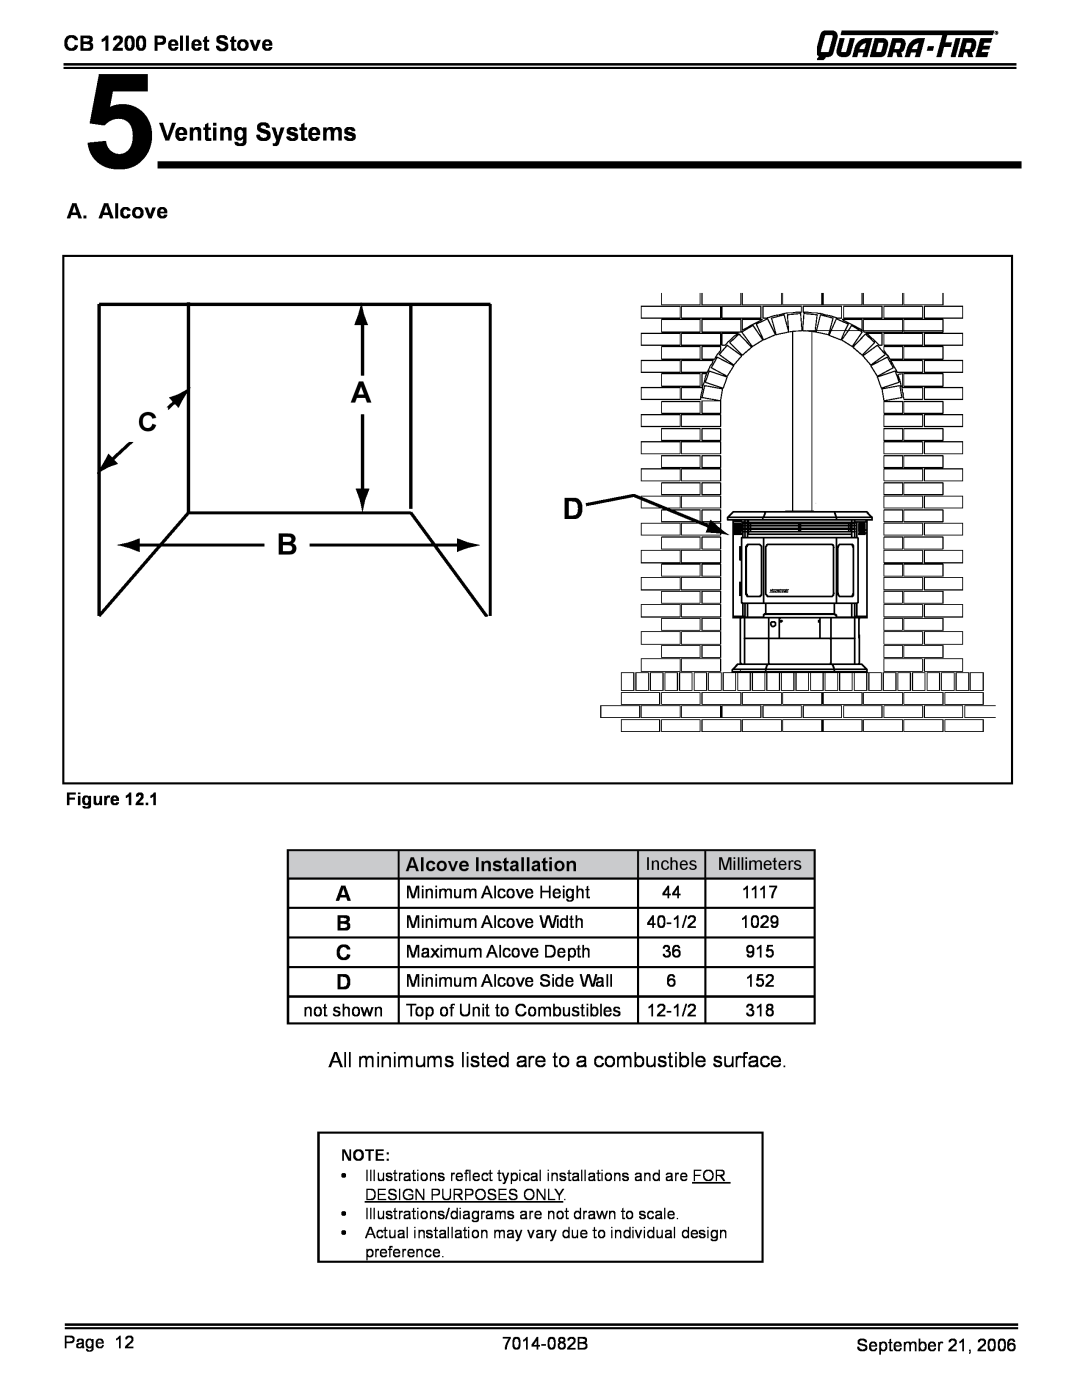 Quadra-Fire CB1200 5Venting Systems, A. Alcove, All minimums listed are to a combustible surface, CB 1200 Pellet Stove 